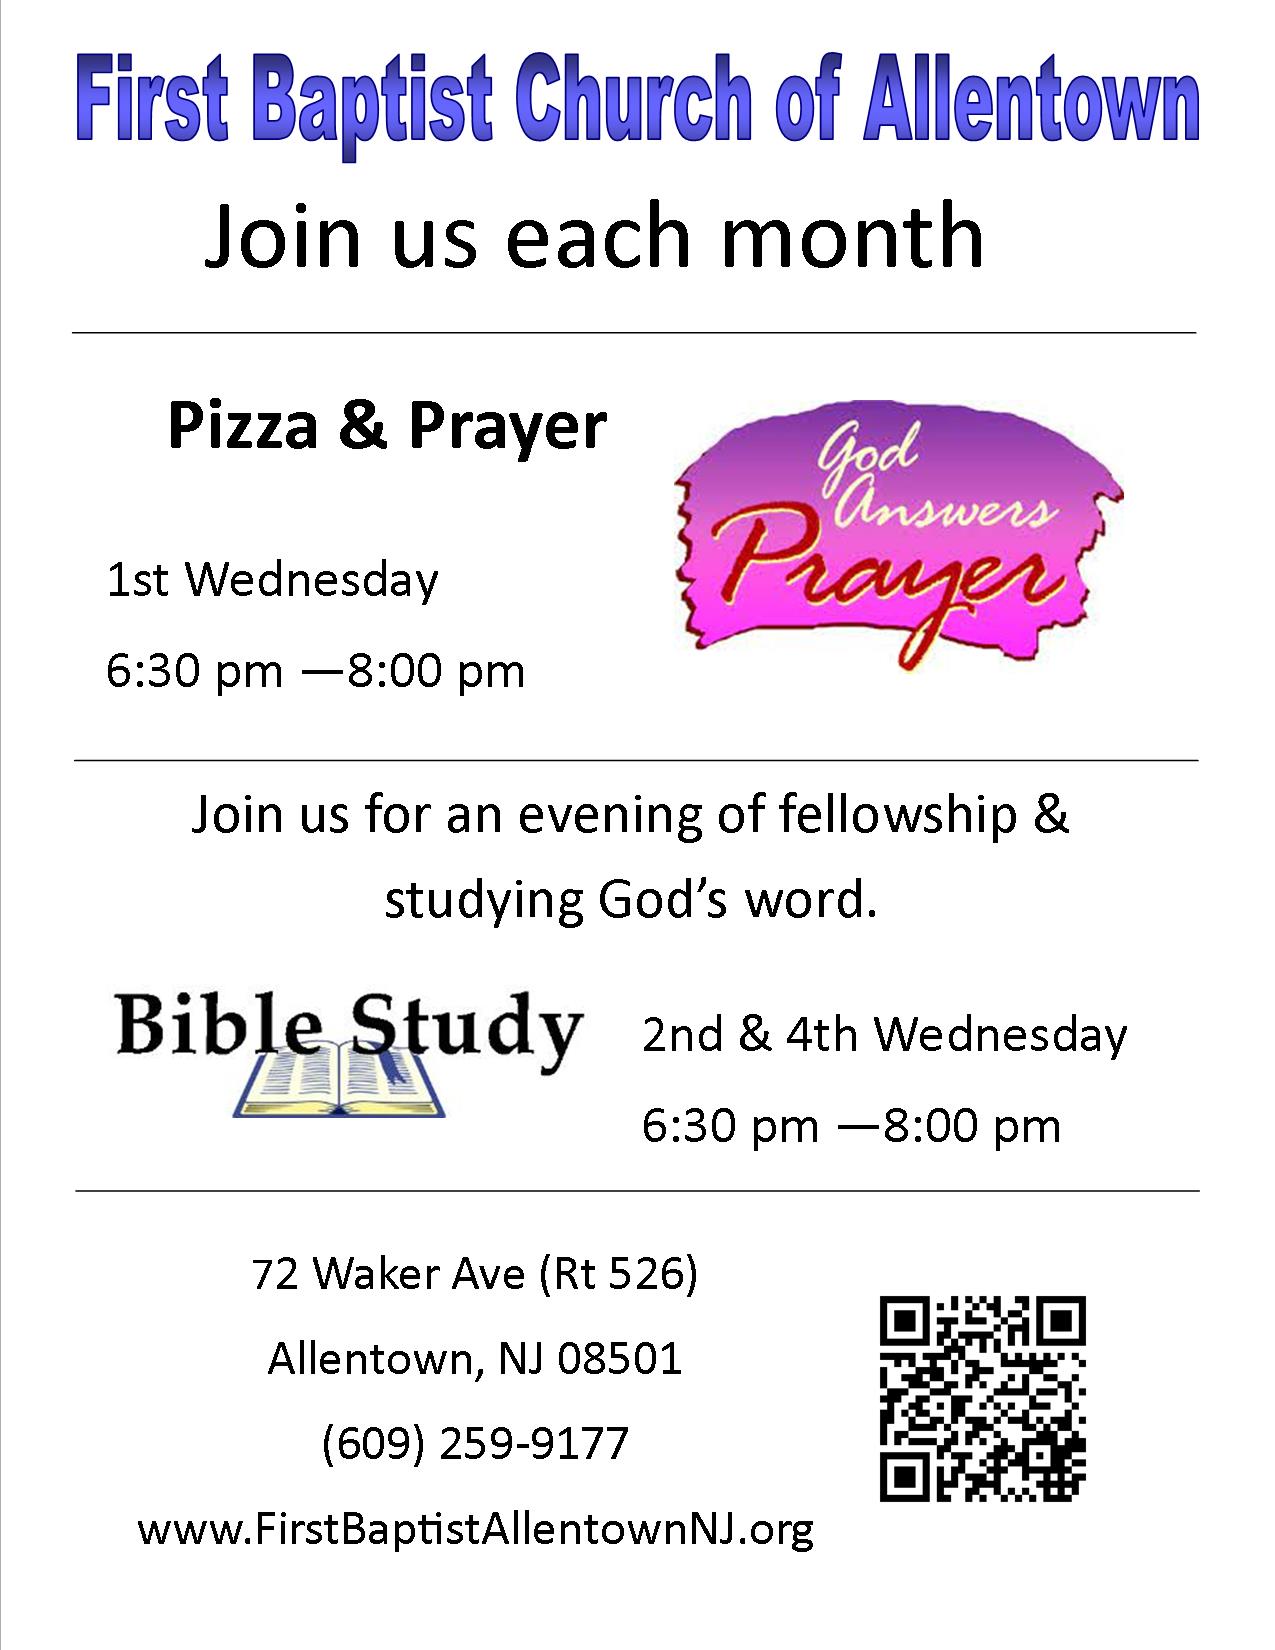 Monthly Activities: Pizza & Prayer and Bible Study